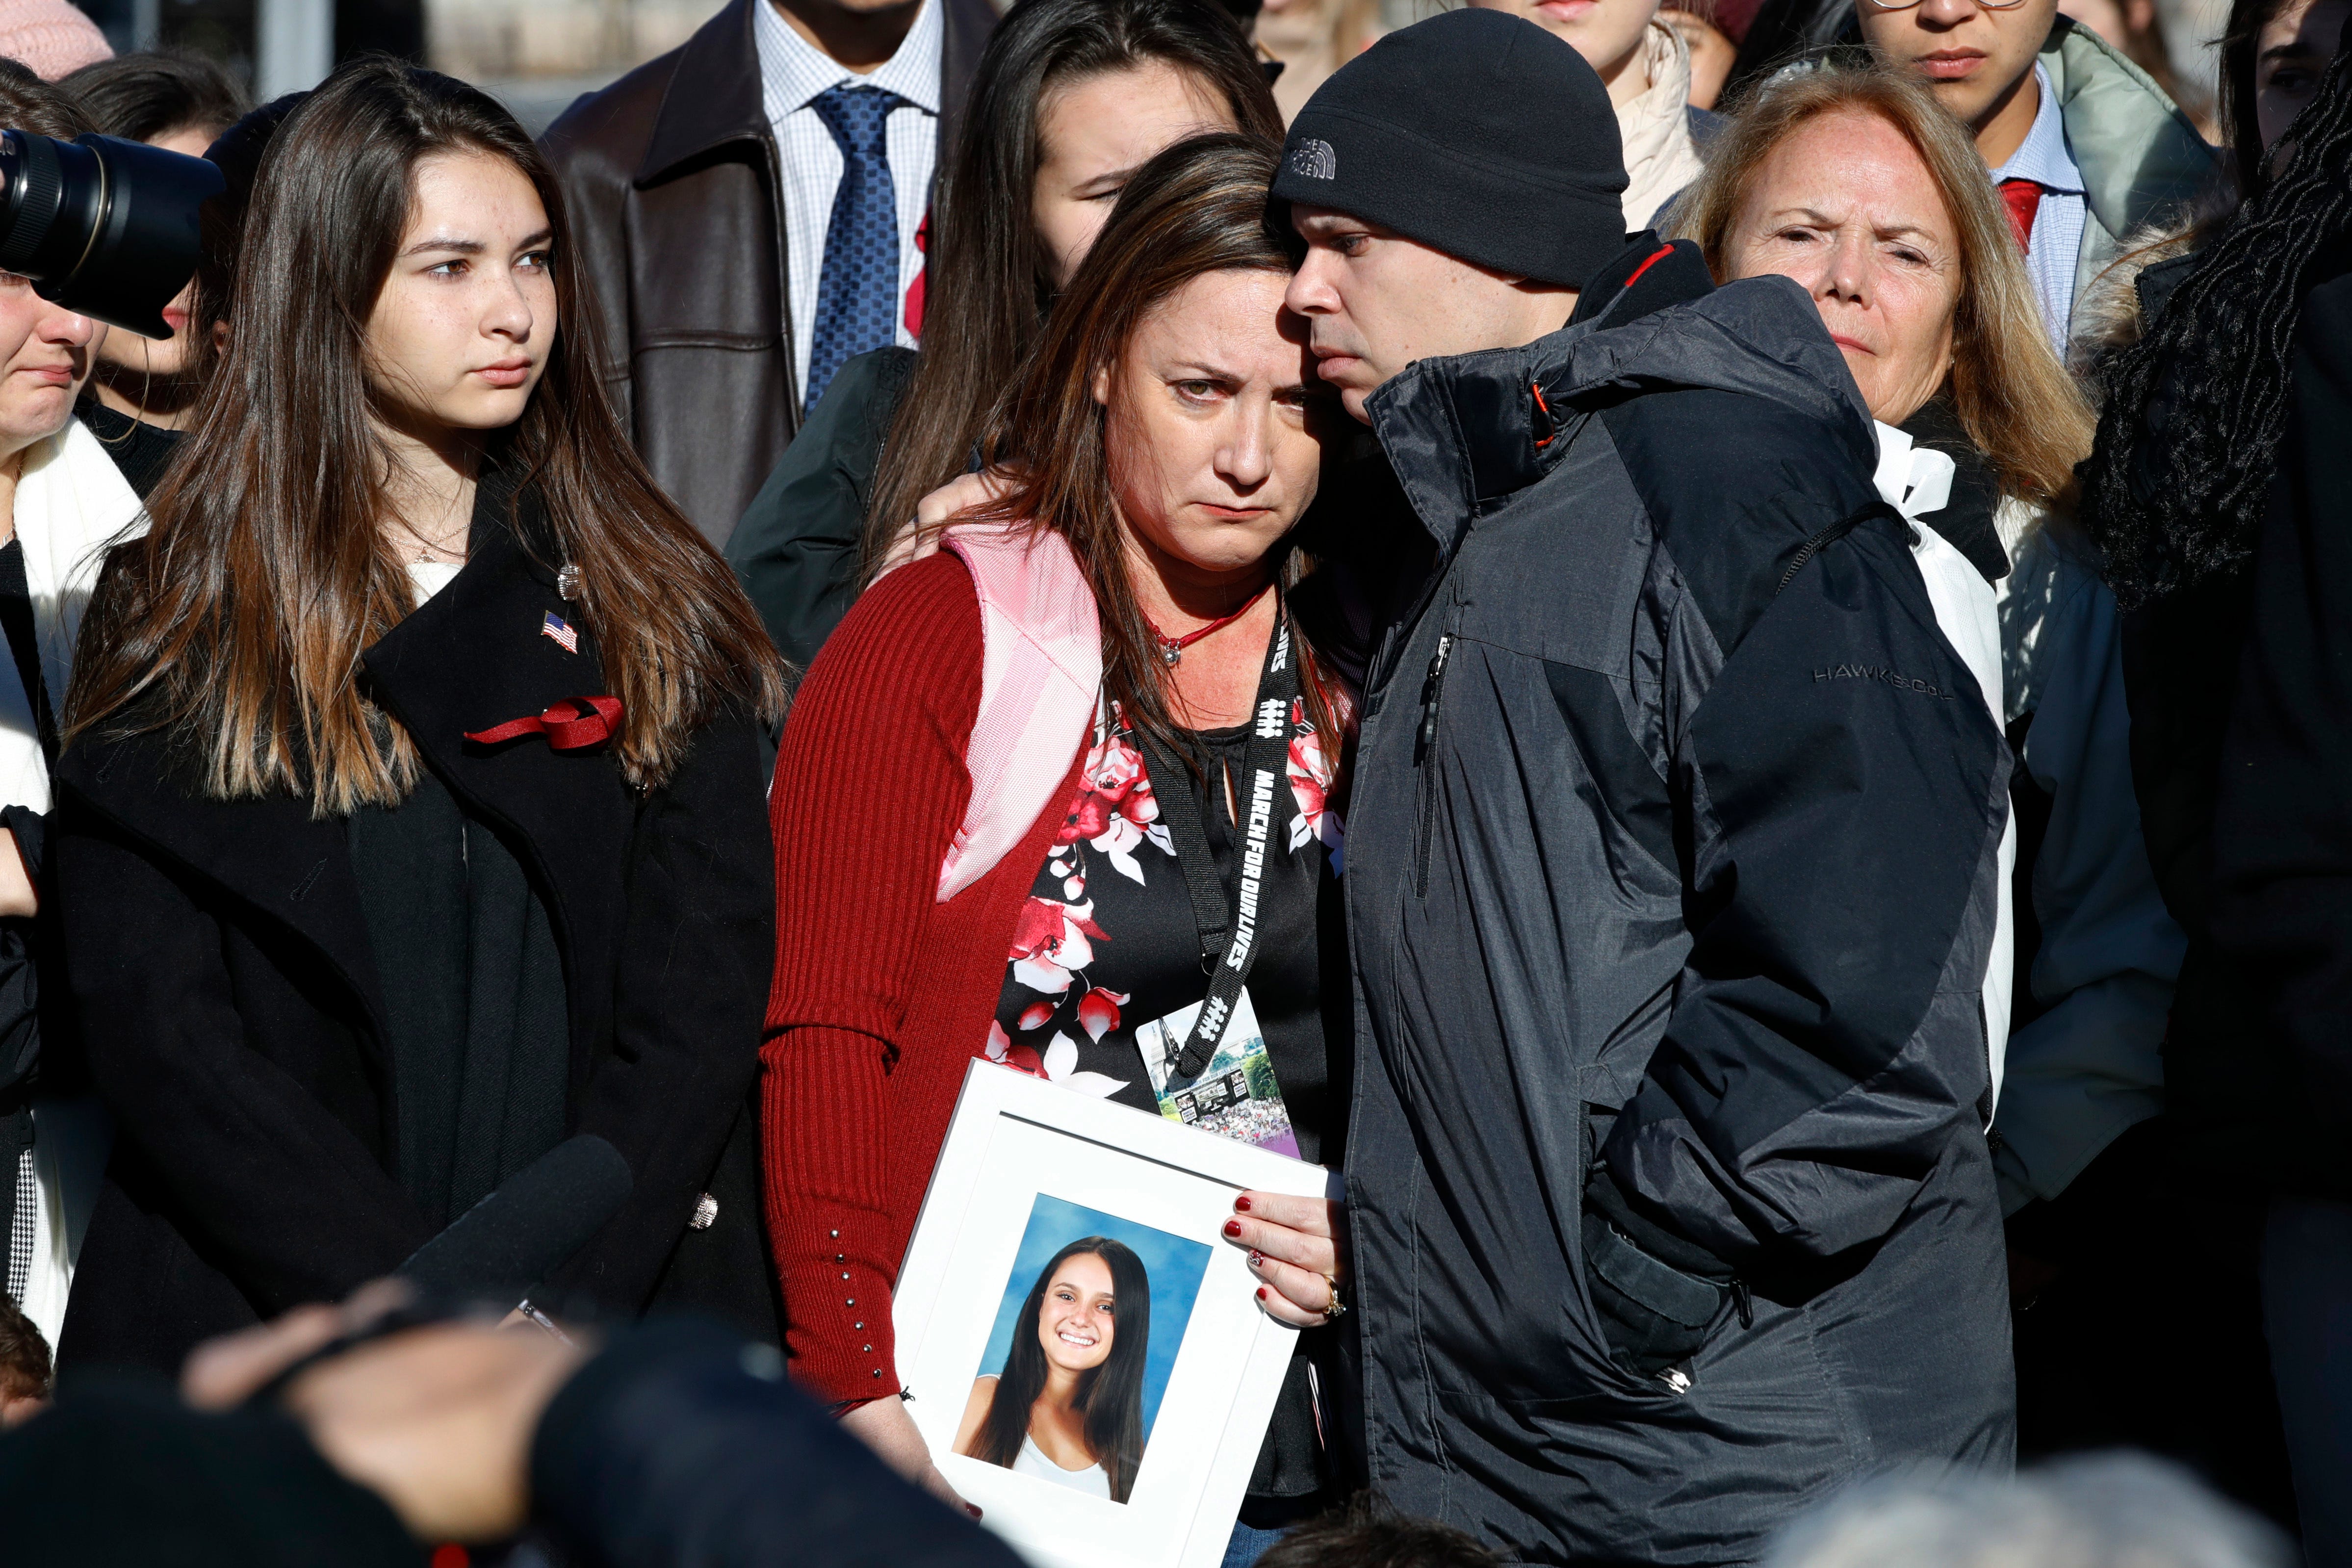 Lori Alhadeff, center, is comforted by her husband Ilan Alhadeff, as she holds a photograph of their daughter, Alyssa Alhadeff, 14, who was killed in the shootings at Marjory Stoneman Douglas High School, while they attend a news conference on gun vi